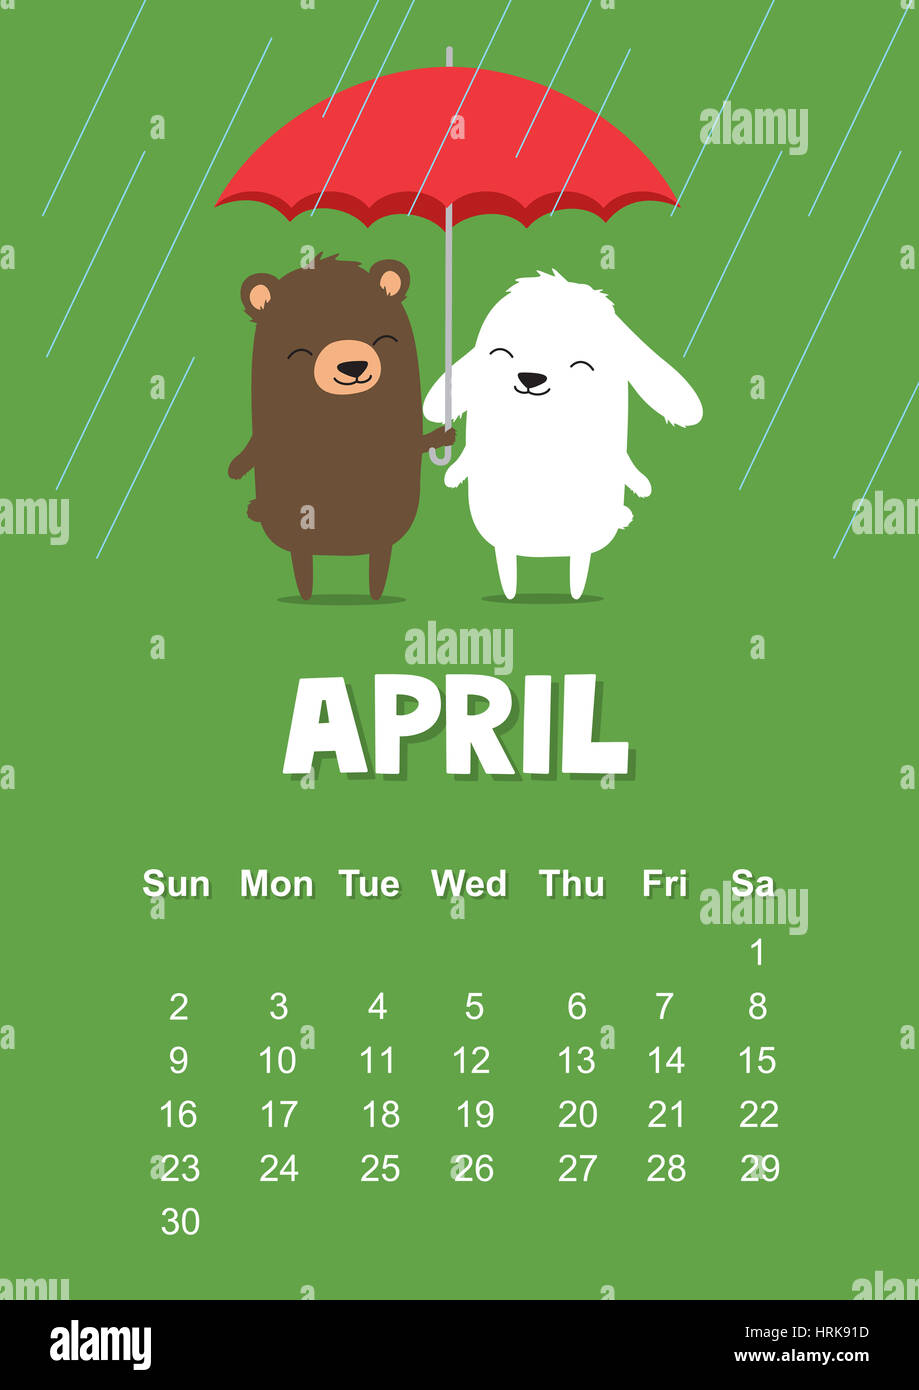 Calendar for April 2017 with cute bunny rabbit and bear under umbrella on green background. A3 size, can be used for printing or web. Stock Photo